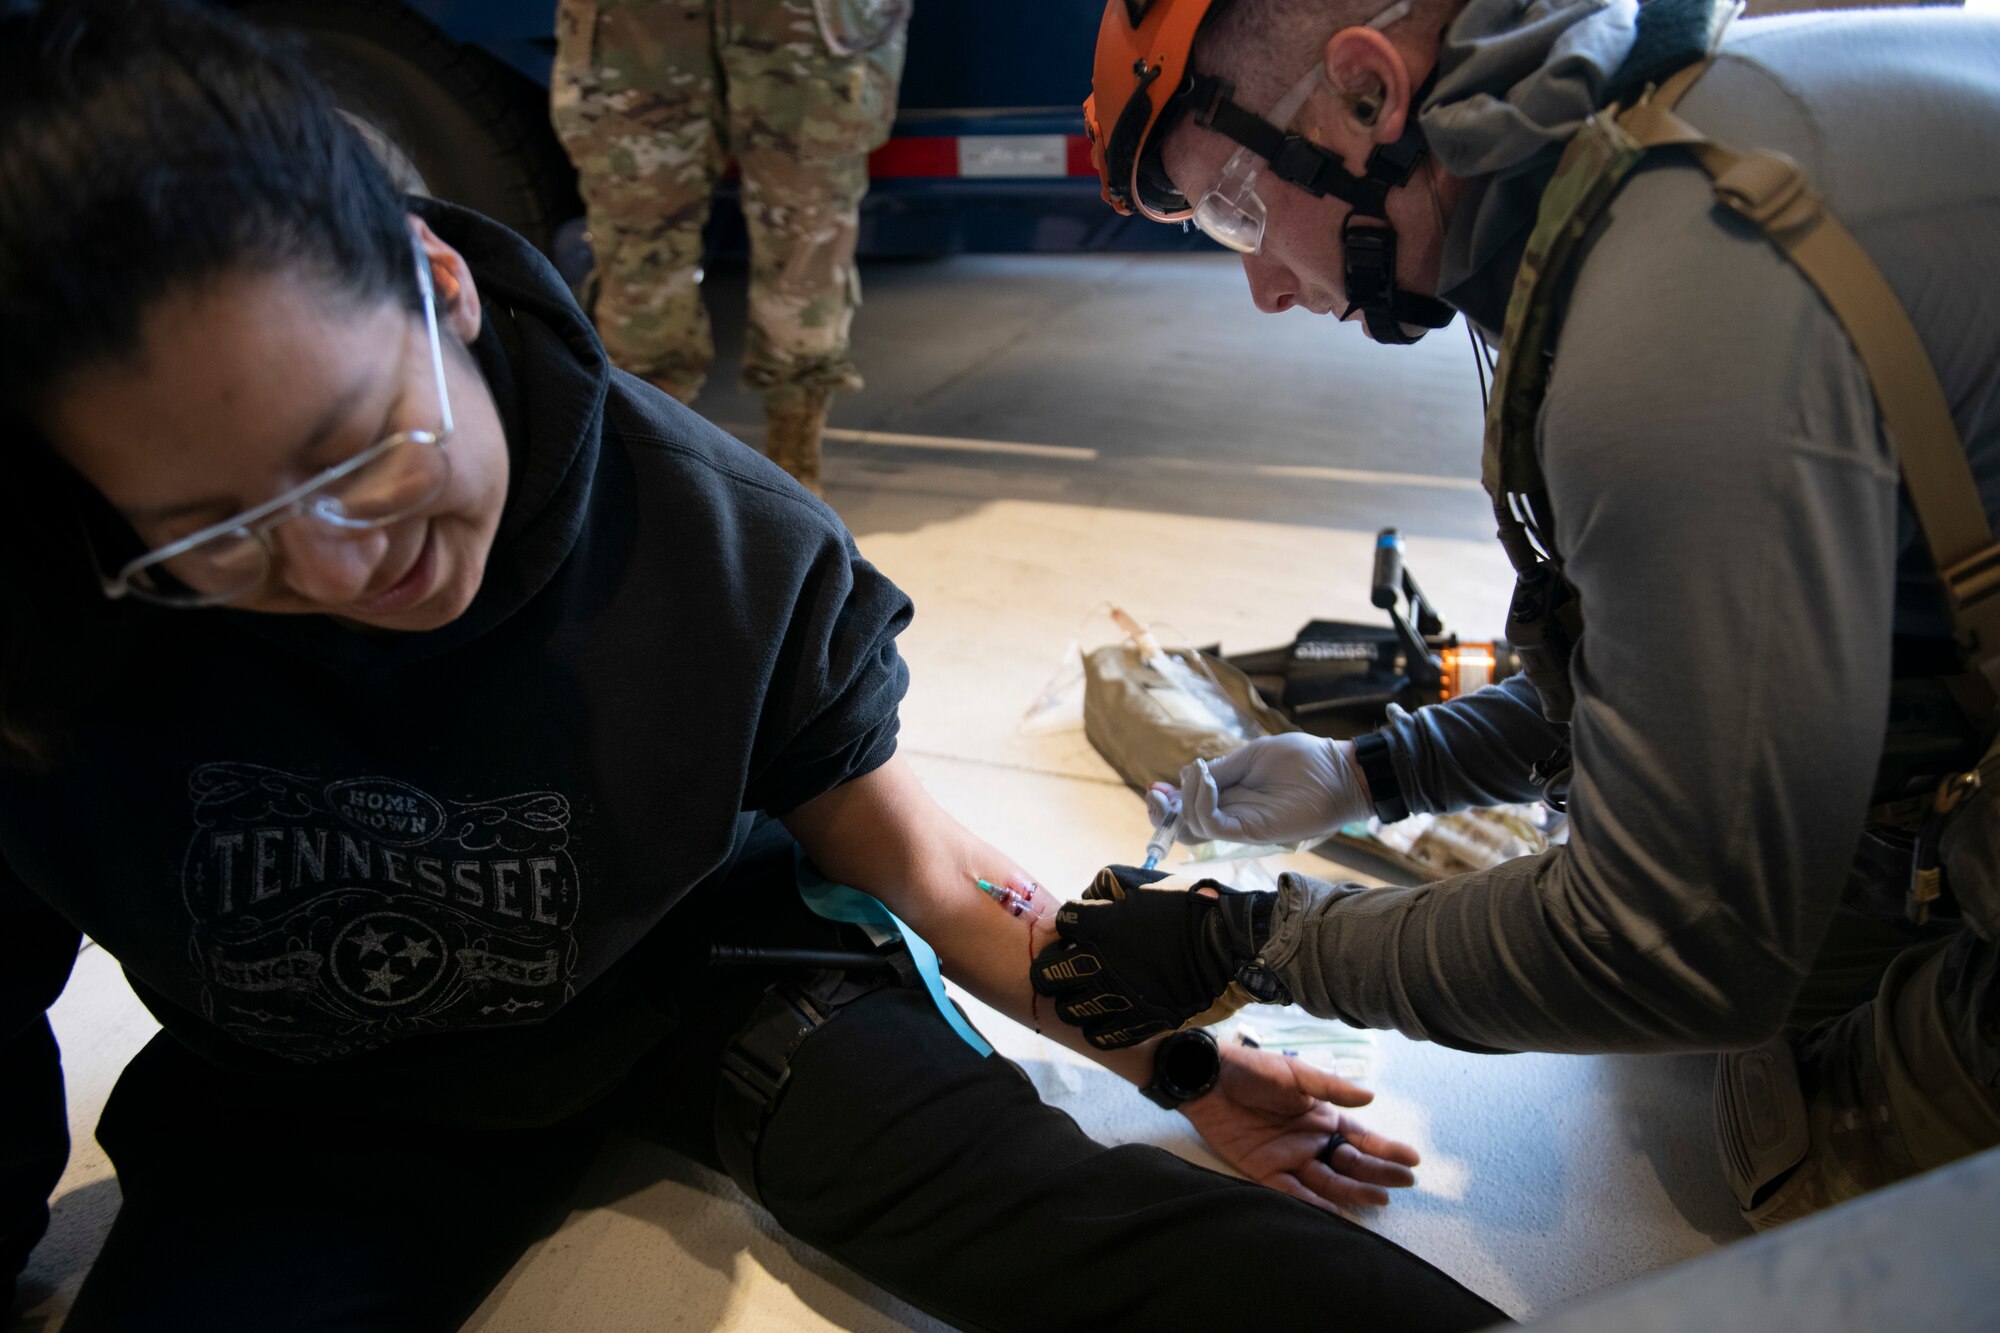 U.S. Air Force Staff Sgt. Kyle Olson, 131st Rescue Squadron pararescueman, inserts an intravenous needle into a simulated casualty while in a hangar during a mass casualty exercise at Travis Air Force Base, California, May 17, 2022.